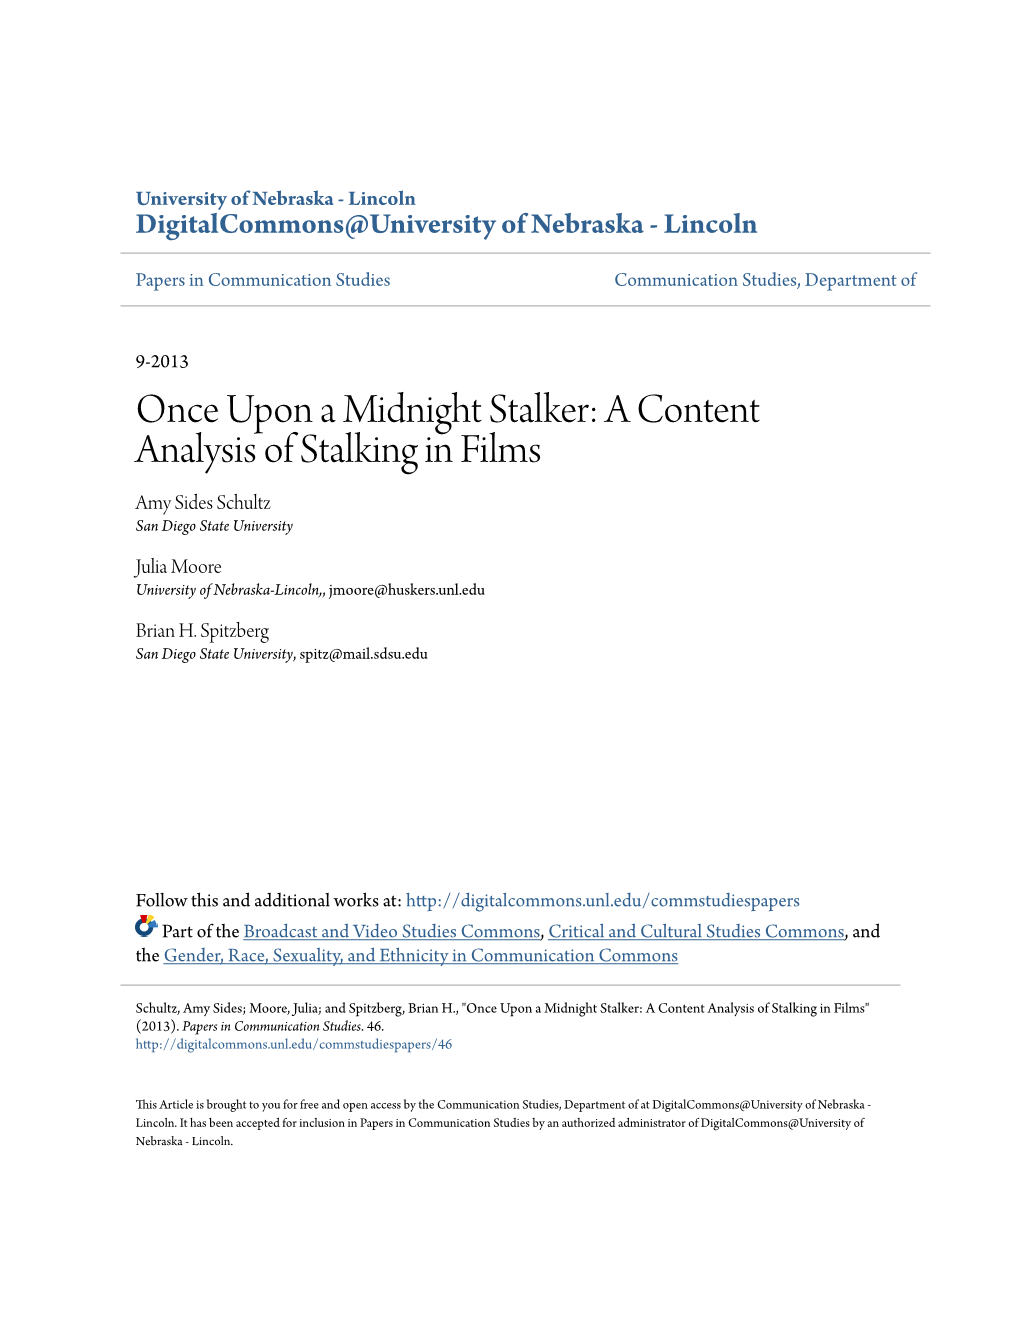 A Content Analysis of Stalking in Films Amy Sides Schultz San Diego State University